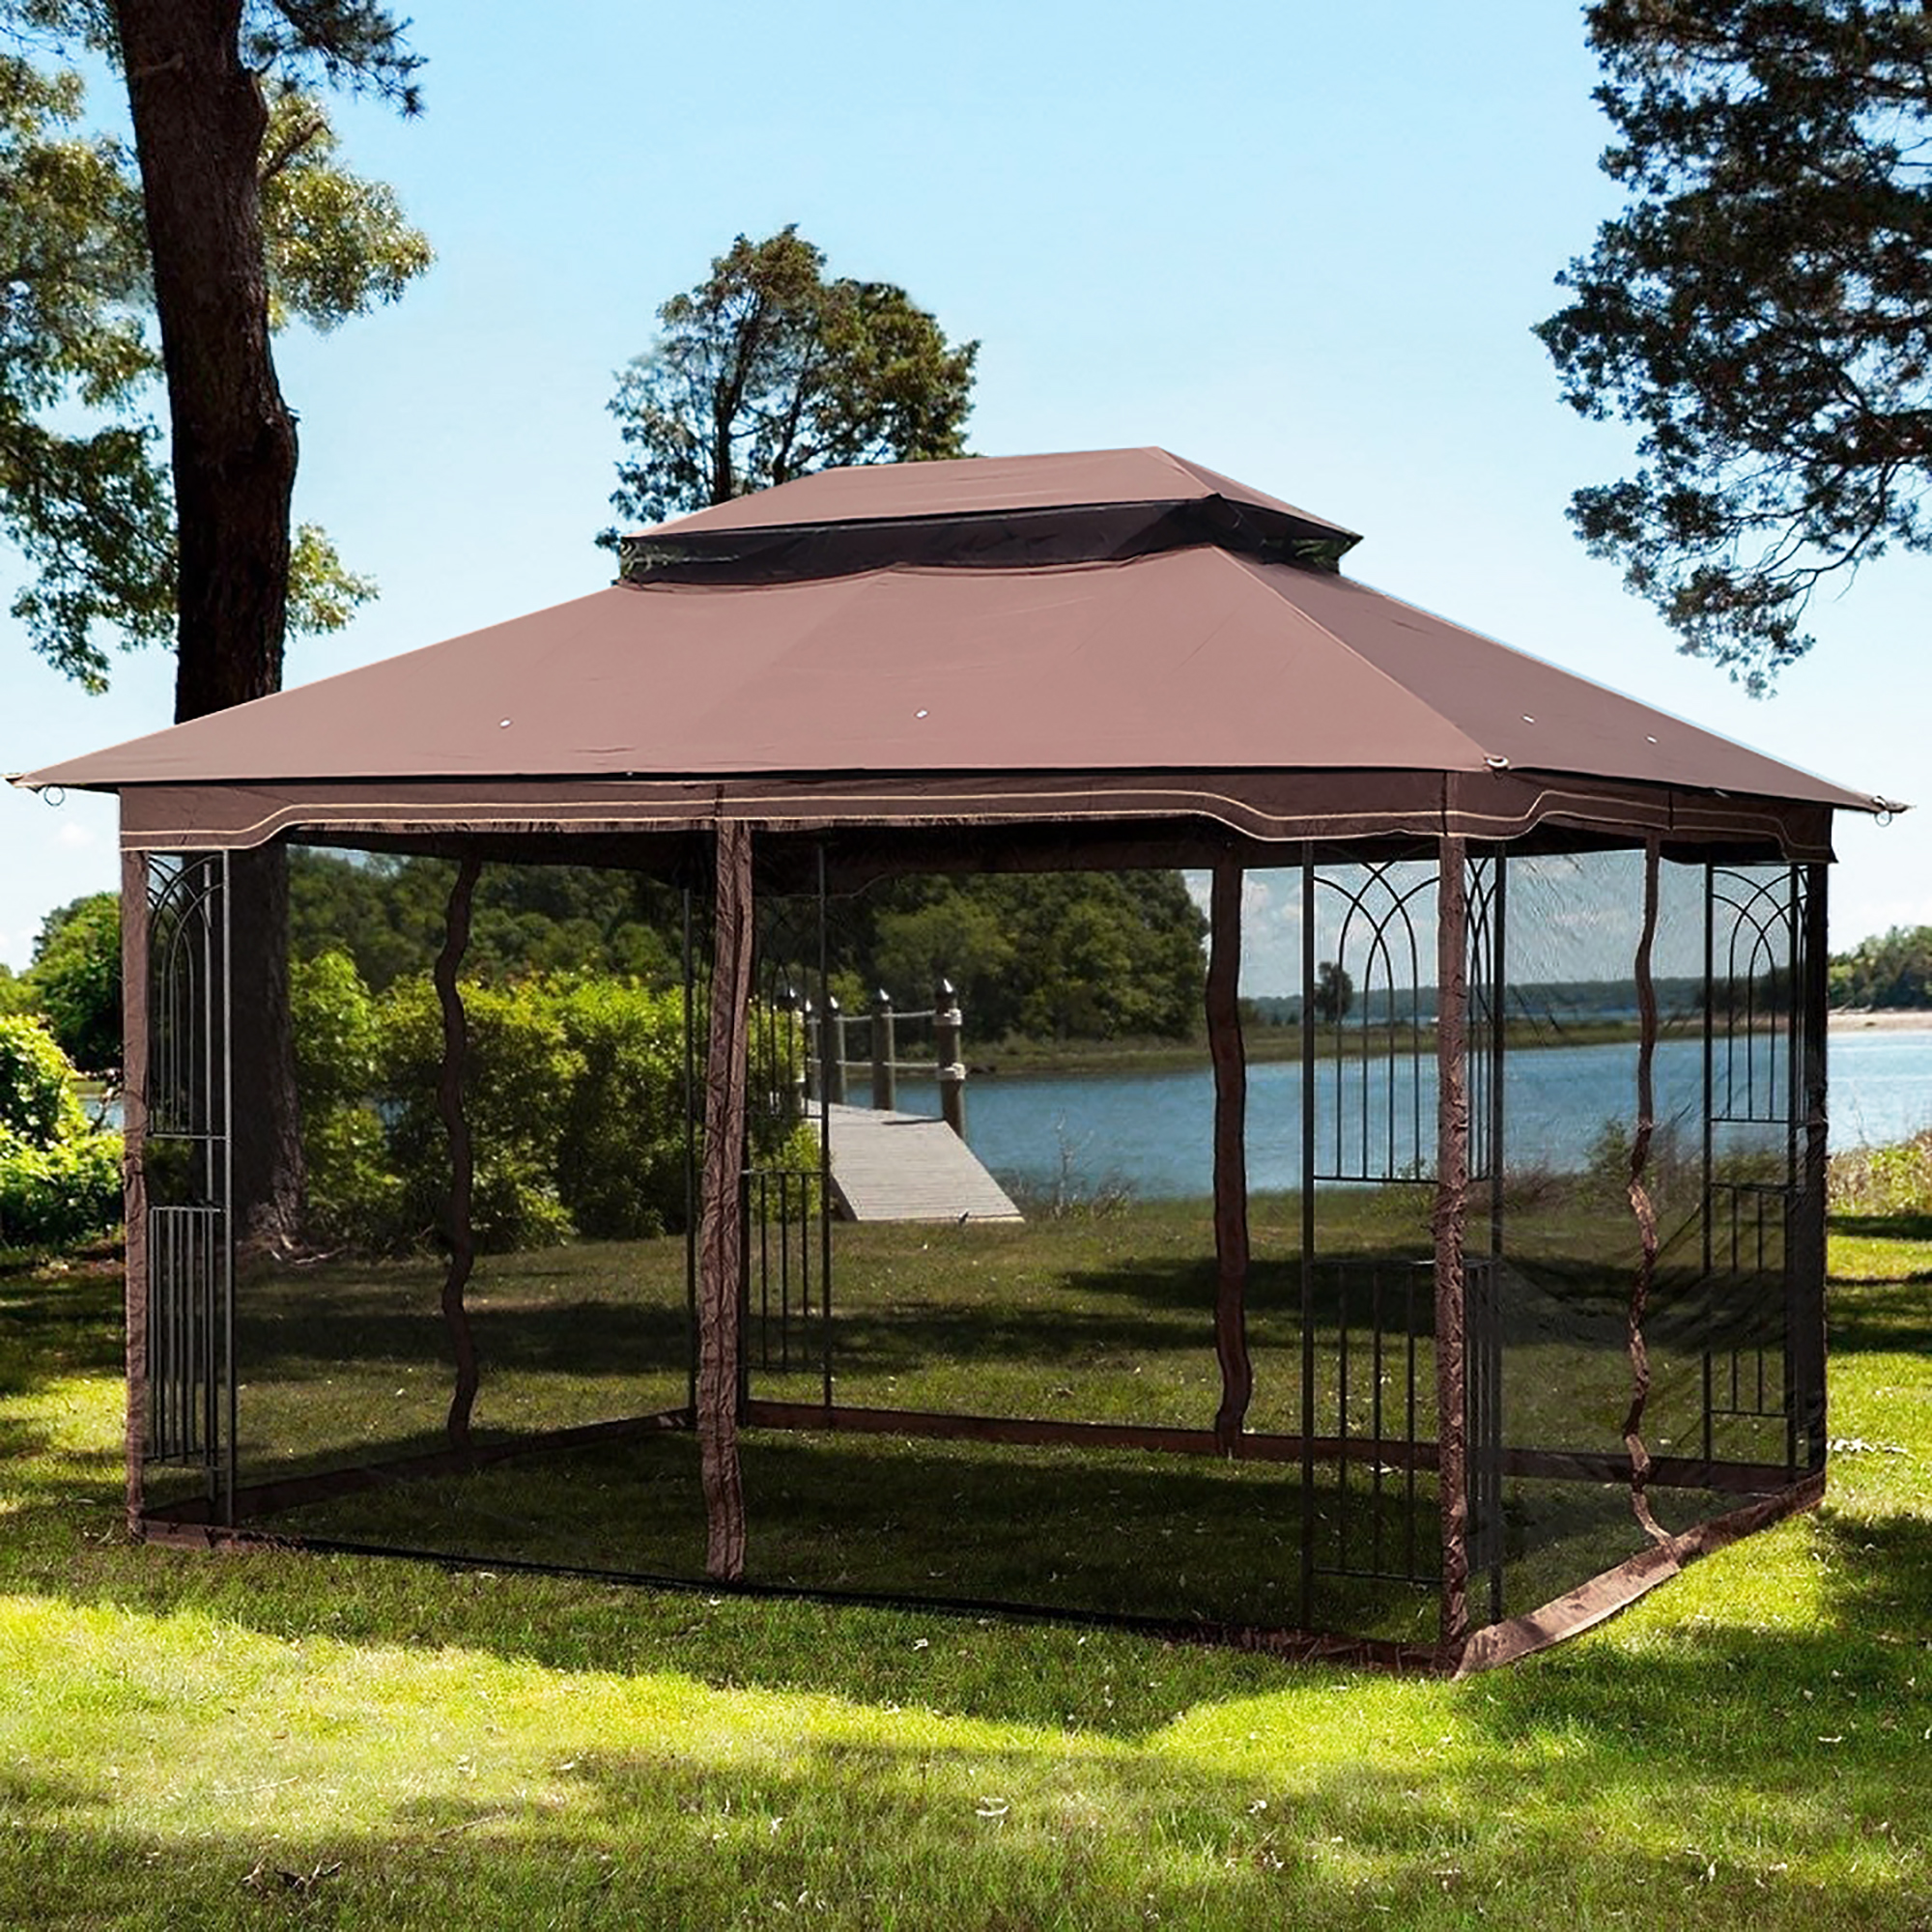 13x10 Outdoor Patio Gazebo Canopy Tent With Ventilated Double Roof And Mosquito net(Detachable Mesh Screen On All Sides),Suitable for Lawn, Garden, Backyard and Deck,Brown Top-Boyel Living